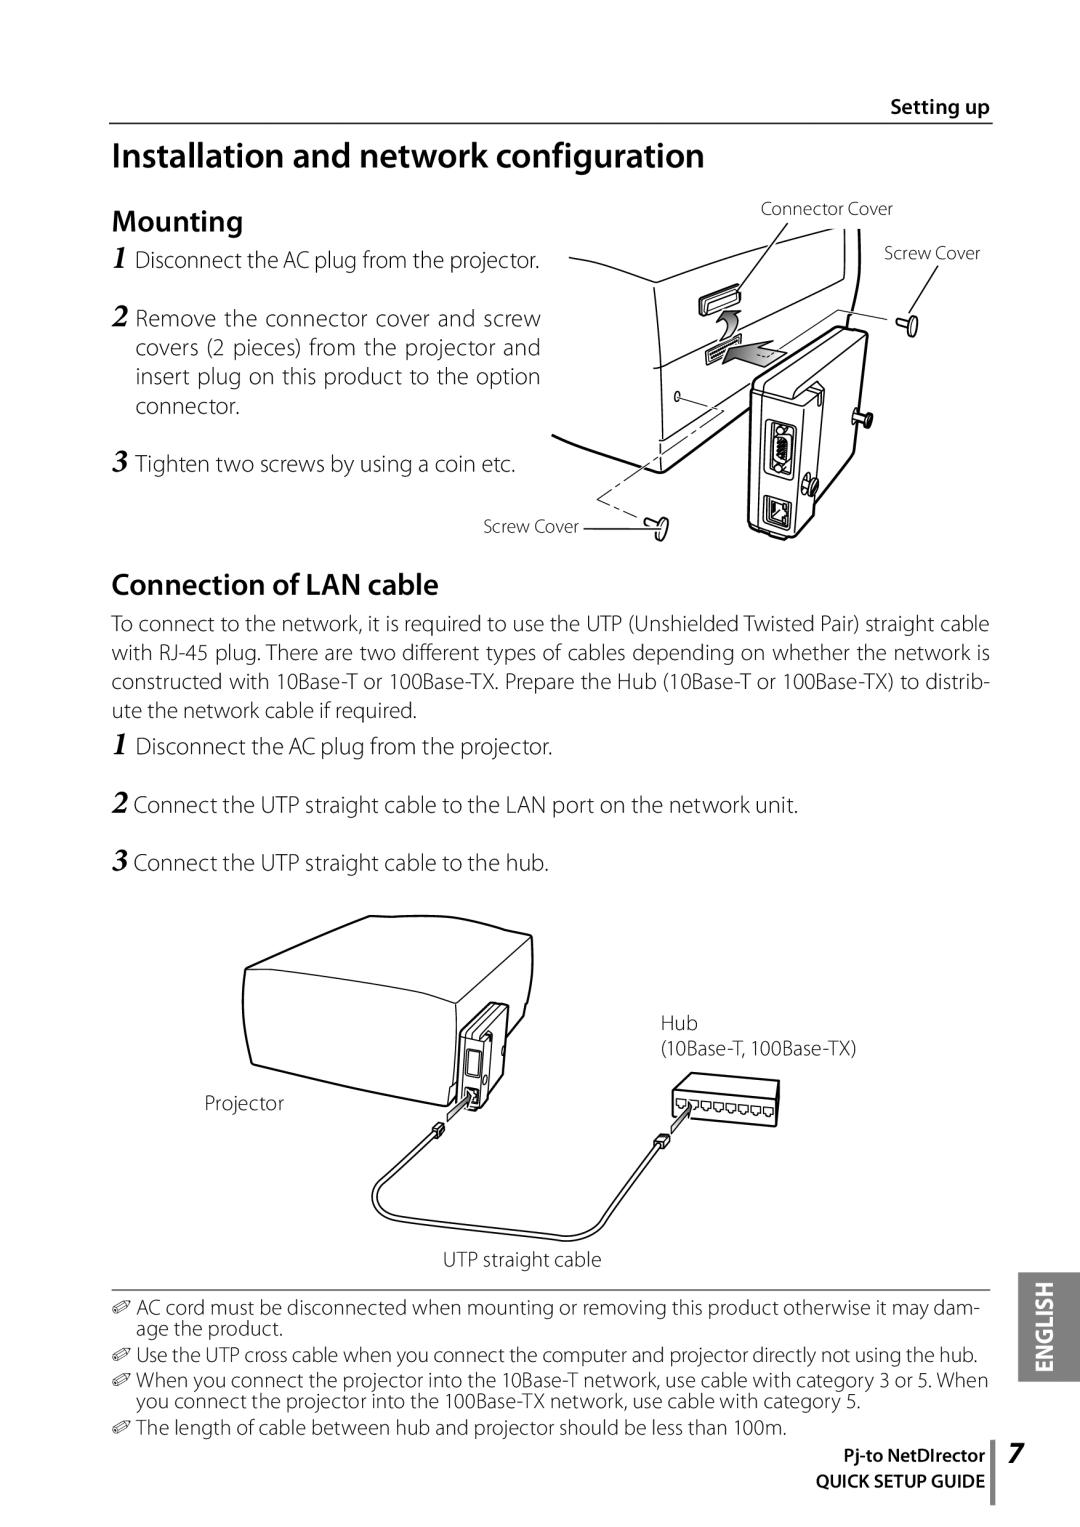 Eiki PJNET-30 setup guide Installation and network configuration, Mounting, Connection of LAN cable, English, Setting up 